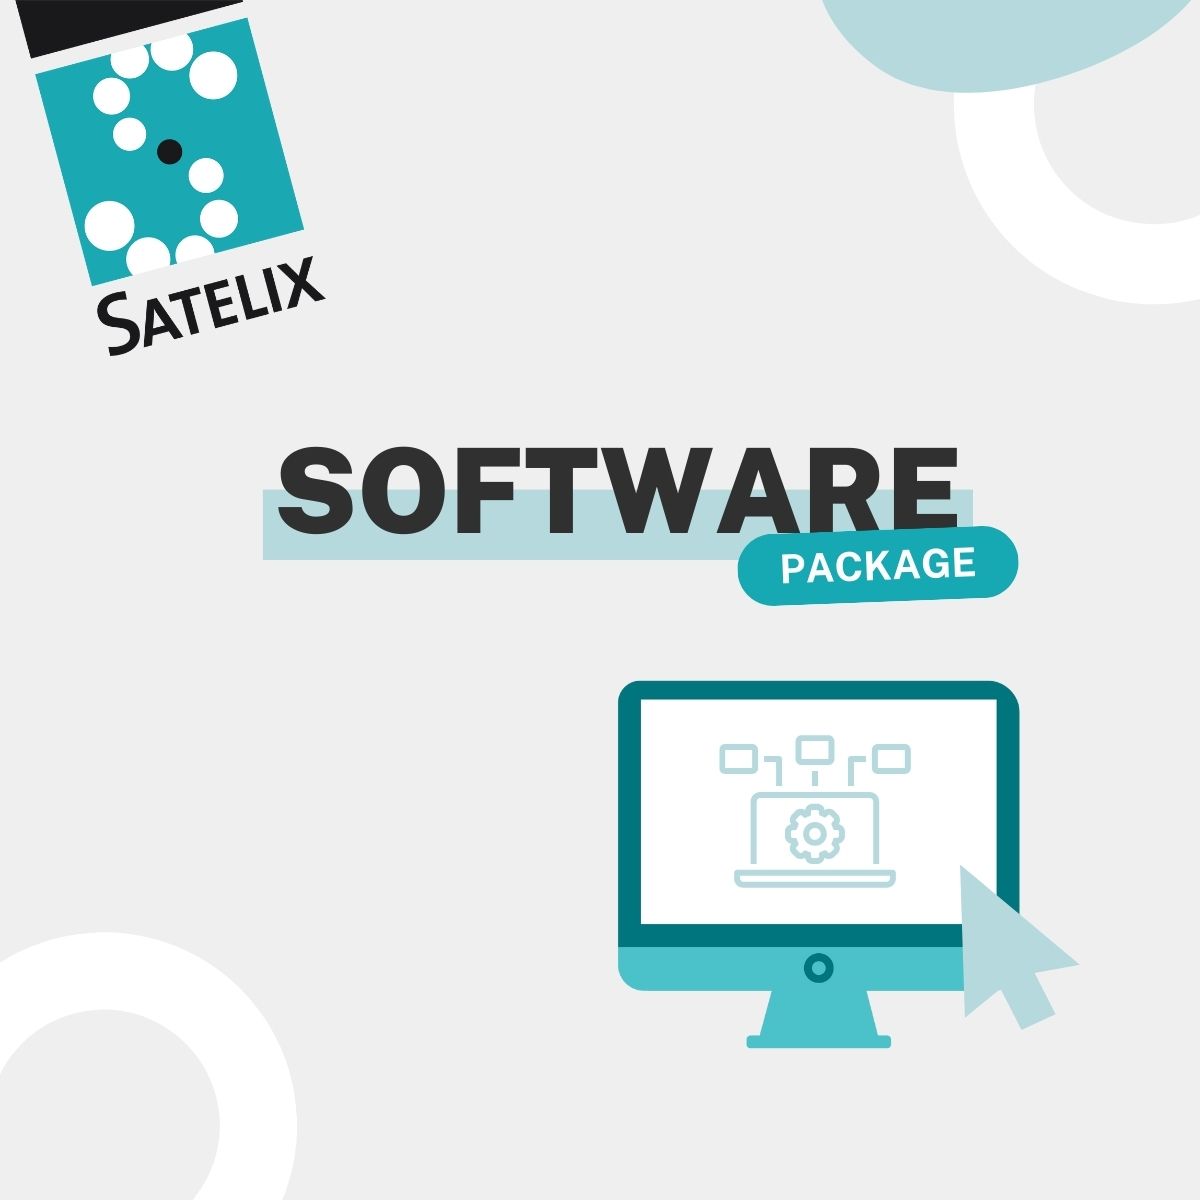 Software package – Satelix